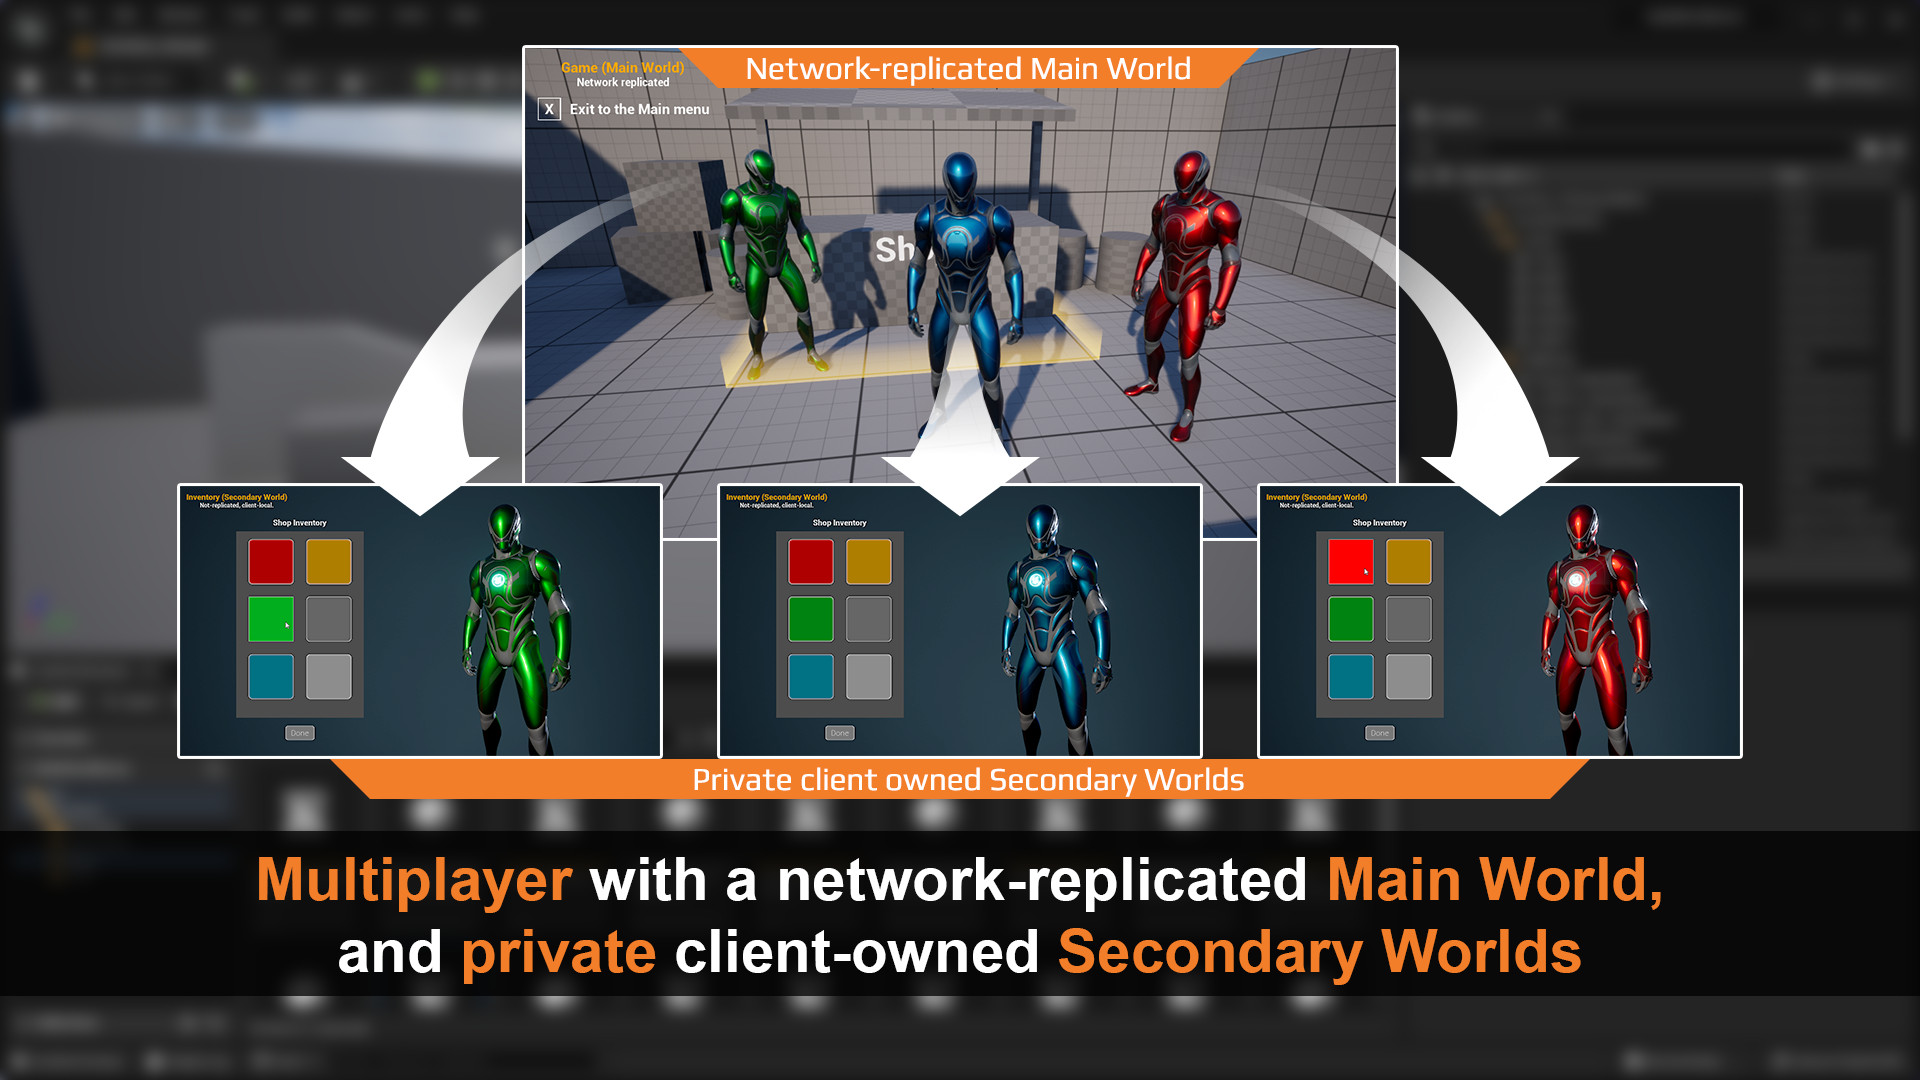 Multiplayer with network replicated Main World, and private client-owned Secondary Worlds